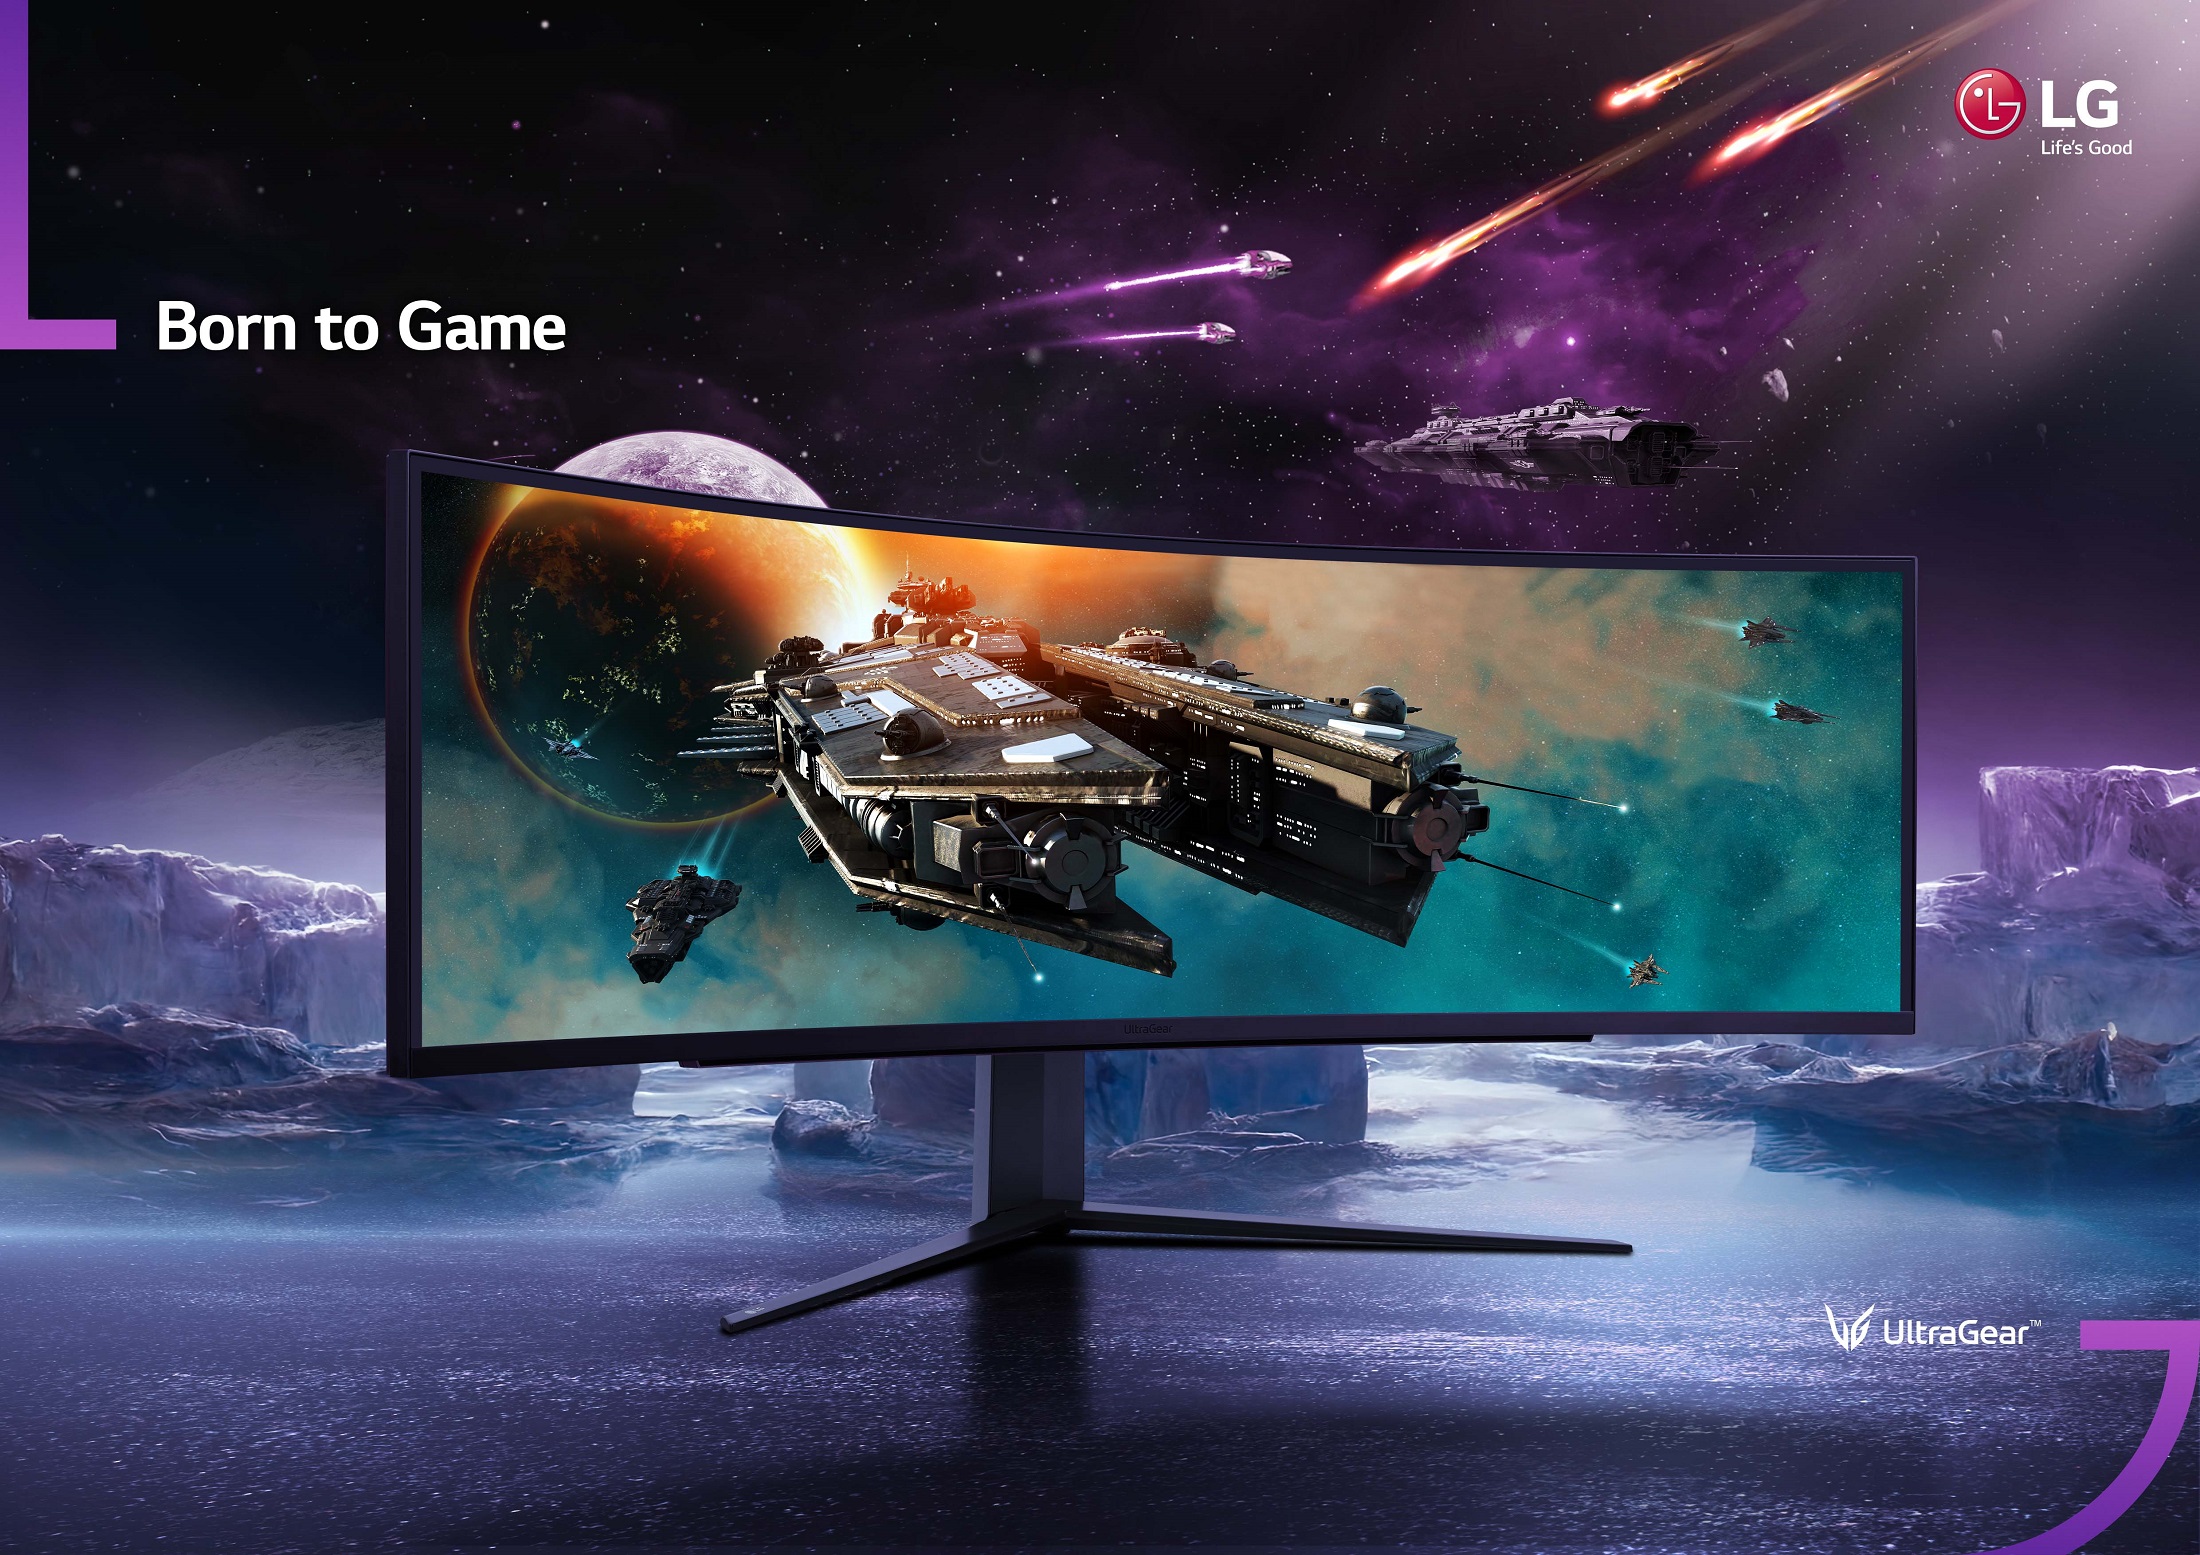 The LG UltraGear Monitor Elevates Immersive Gaming with its 49-Inch, 32:9 Aspect Ratio Screen